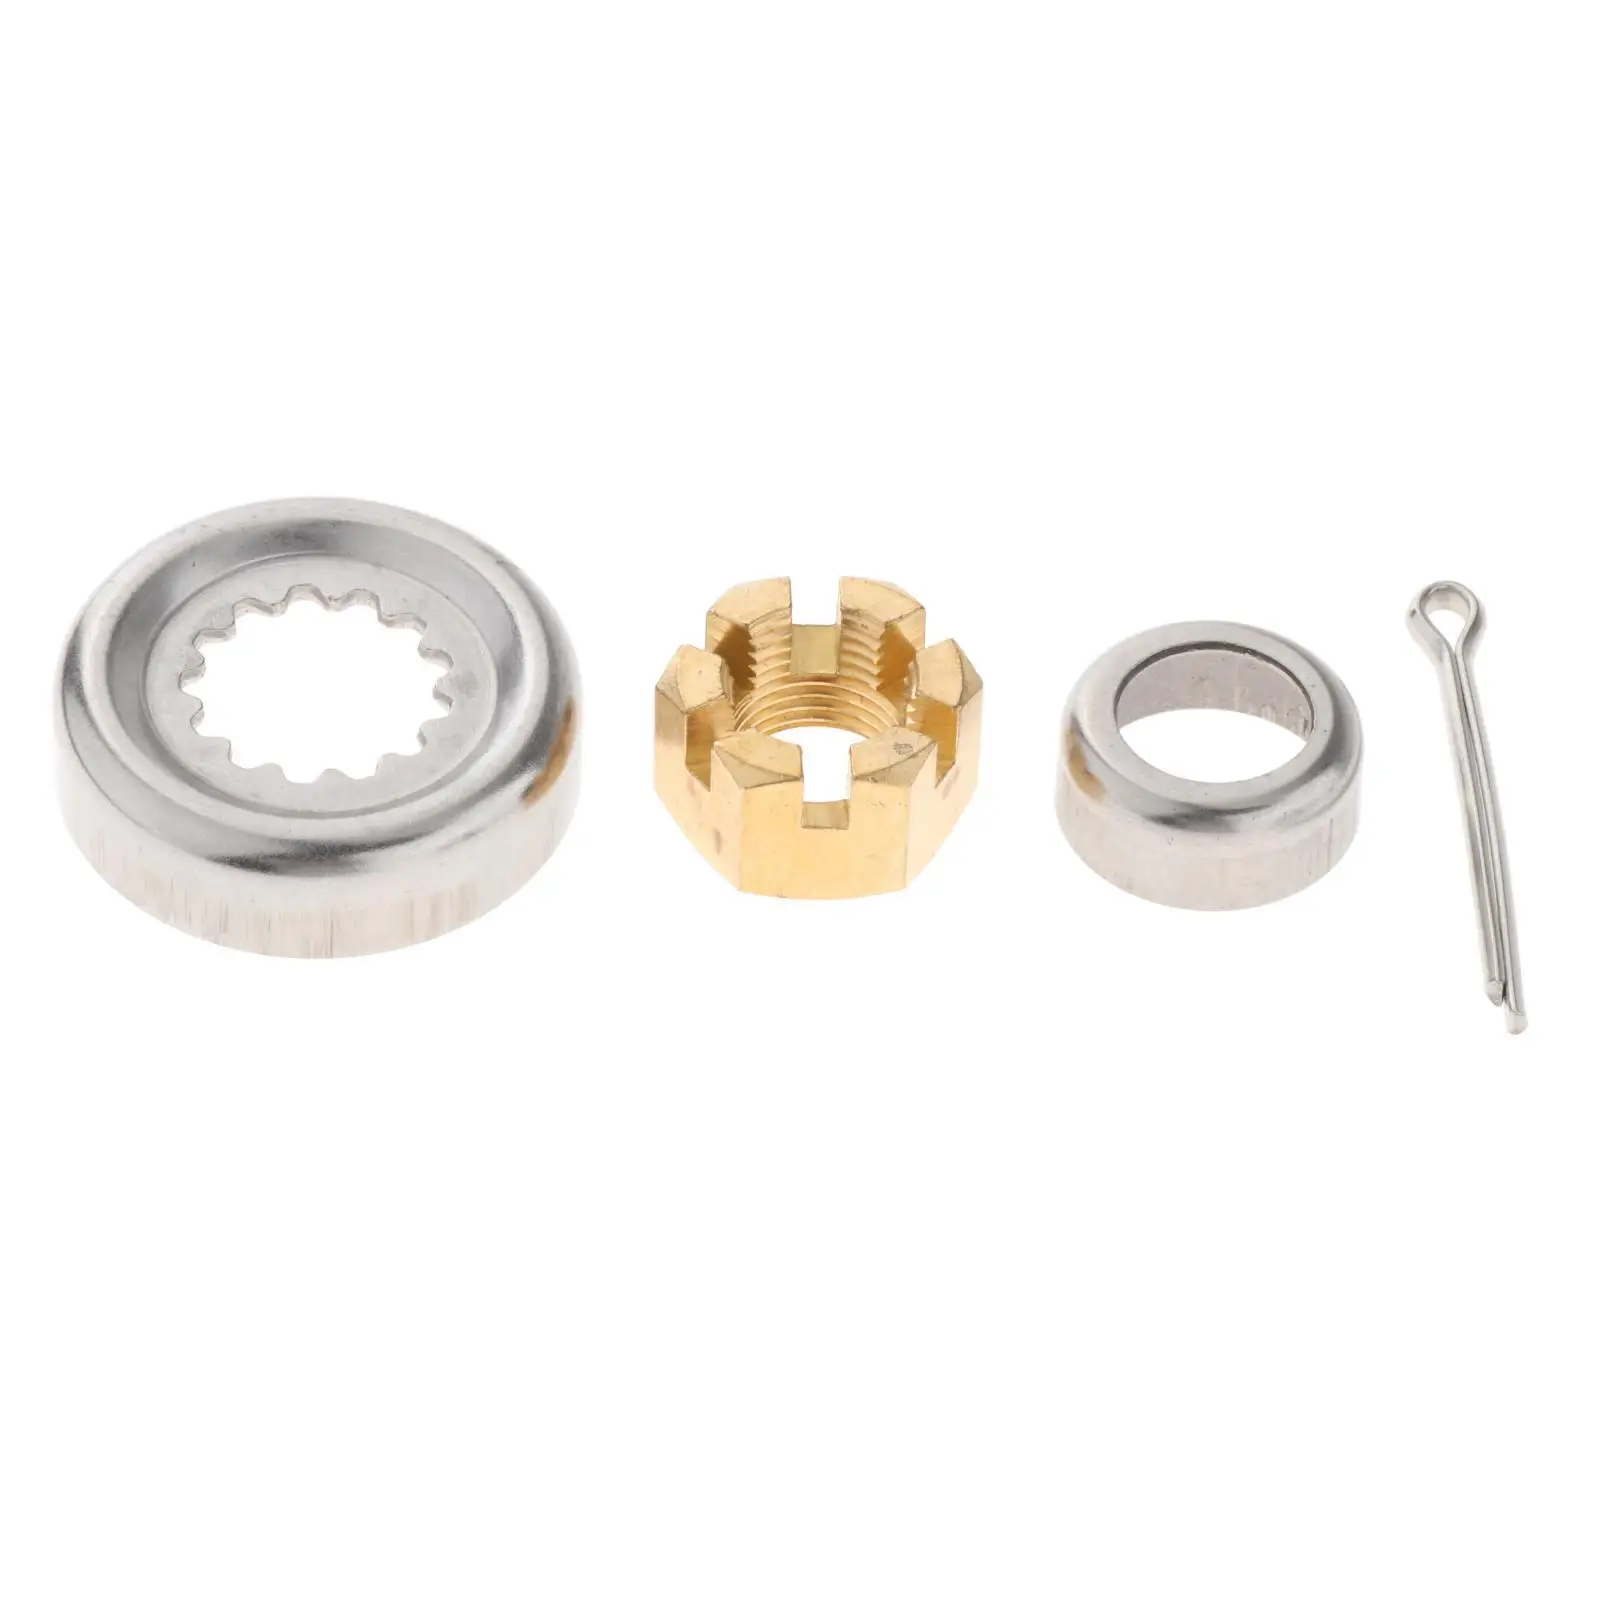 Propeller Spacer Kit, 66997-00 Spacer  Outboard F30-F60 Accessories